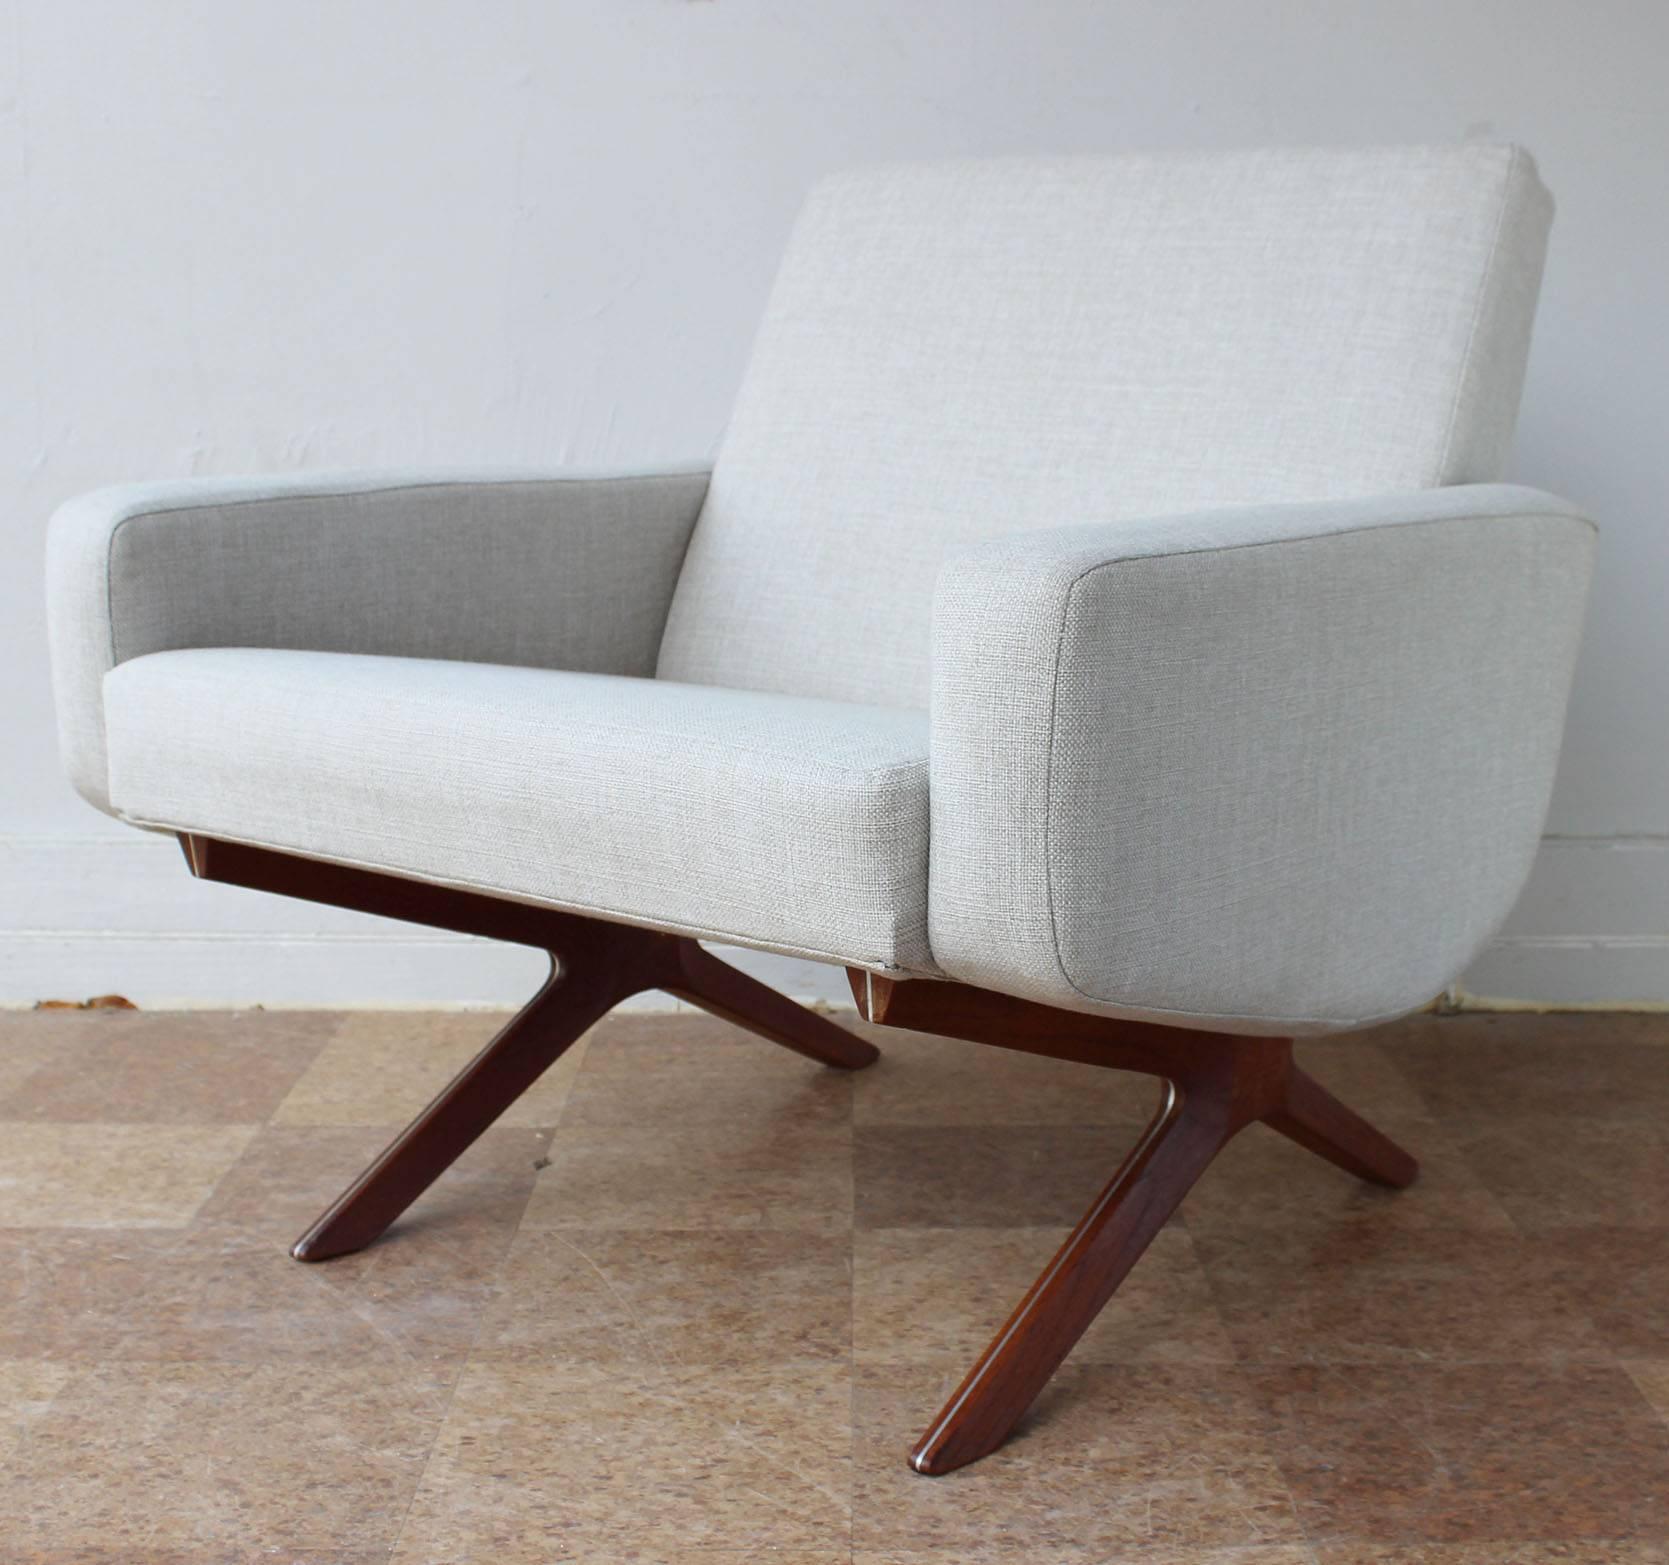 A stunning pair of Silverline armchairs with solid teak and aluminum inlay base, upholstered in cotton-linen weave, designed by Peter Hvidt and Orla Molgaard-Nielson, 1962.

complementary shipping within 30 miles.